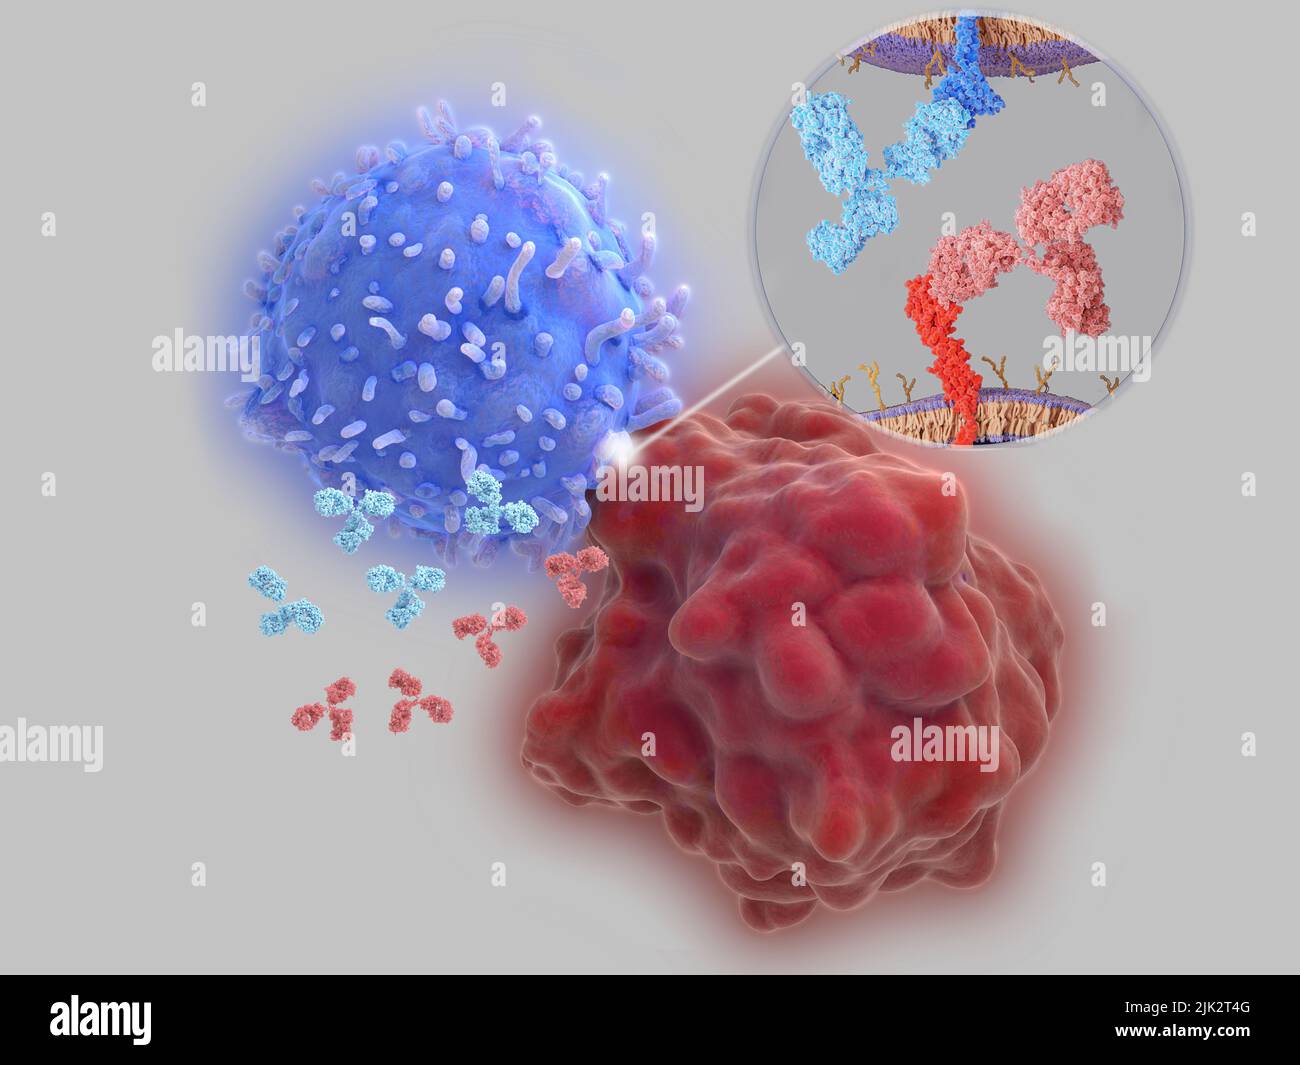 Immune checkpoint inhibitors, illustration. Immune checkpoints are regulators of the immune system. Antibodies (light blue and red)  block the interaction between PD-L1 (programmed cell death 1 ligand 1, red molecule) on the surface of a cancer cell (large red) and the immune checkpoint PD-1 (programmed cell death protein 1, blue molecule) on a T-cell (large blue), that would lead to  the inhibition of T-cell killing tumour cells. Stock Photo